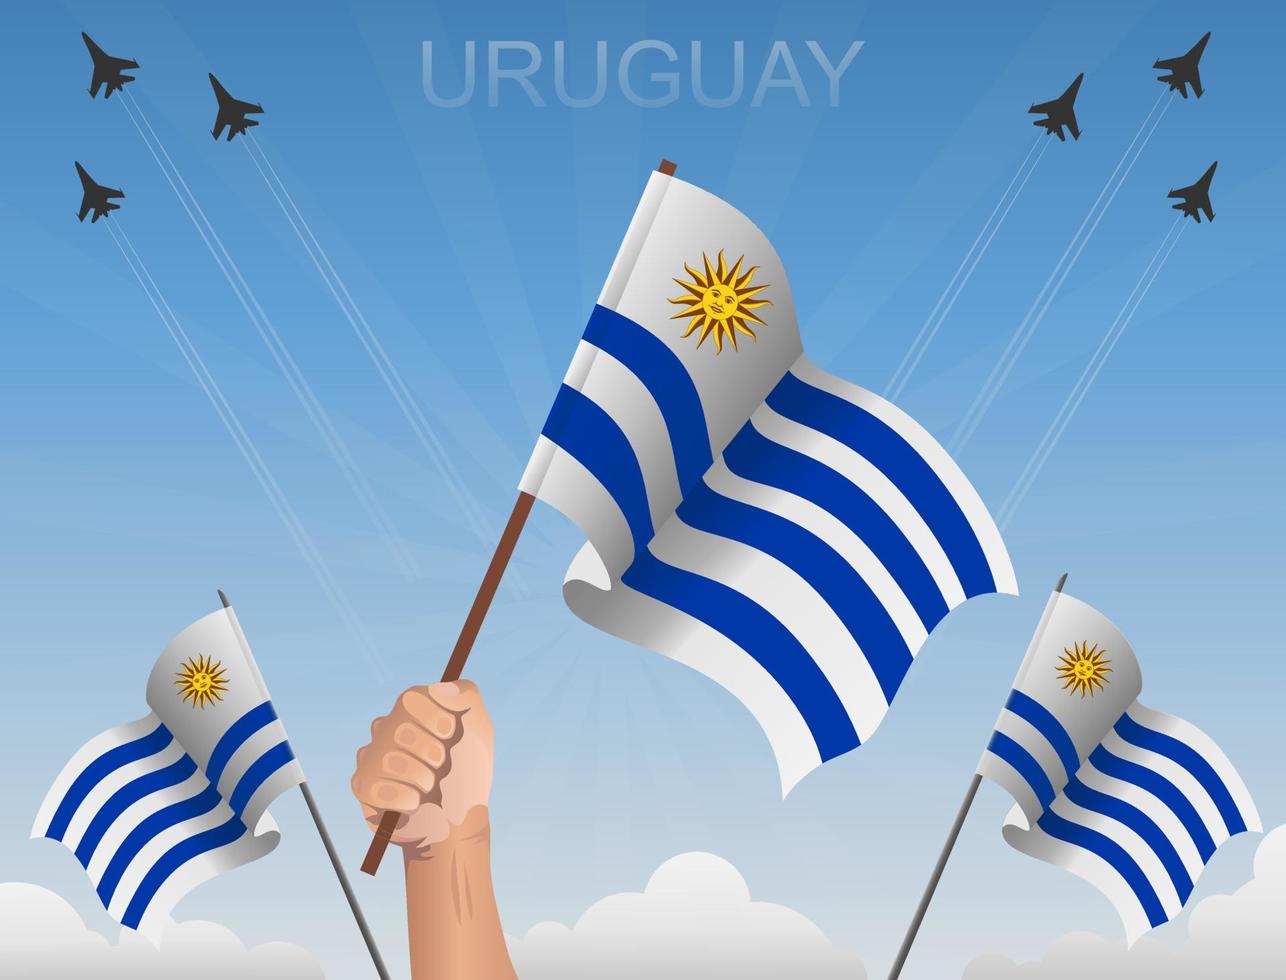 Uruguay flags Flying under the blue sky vector